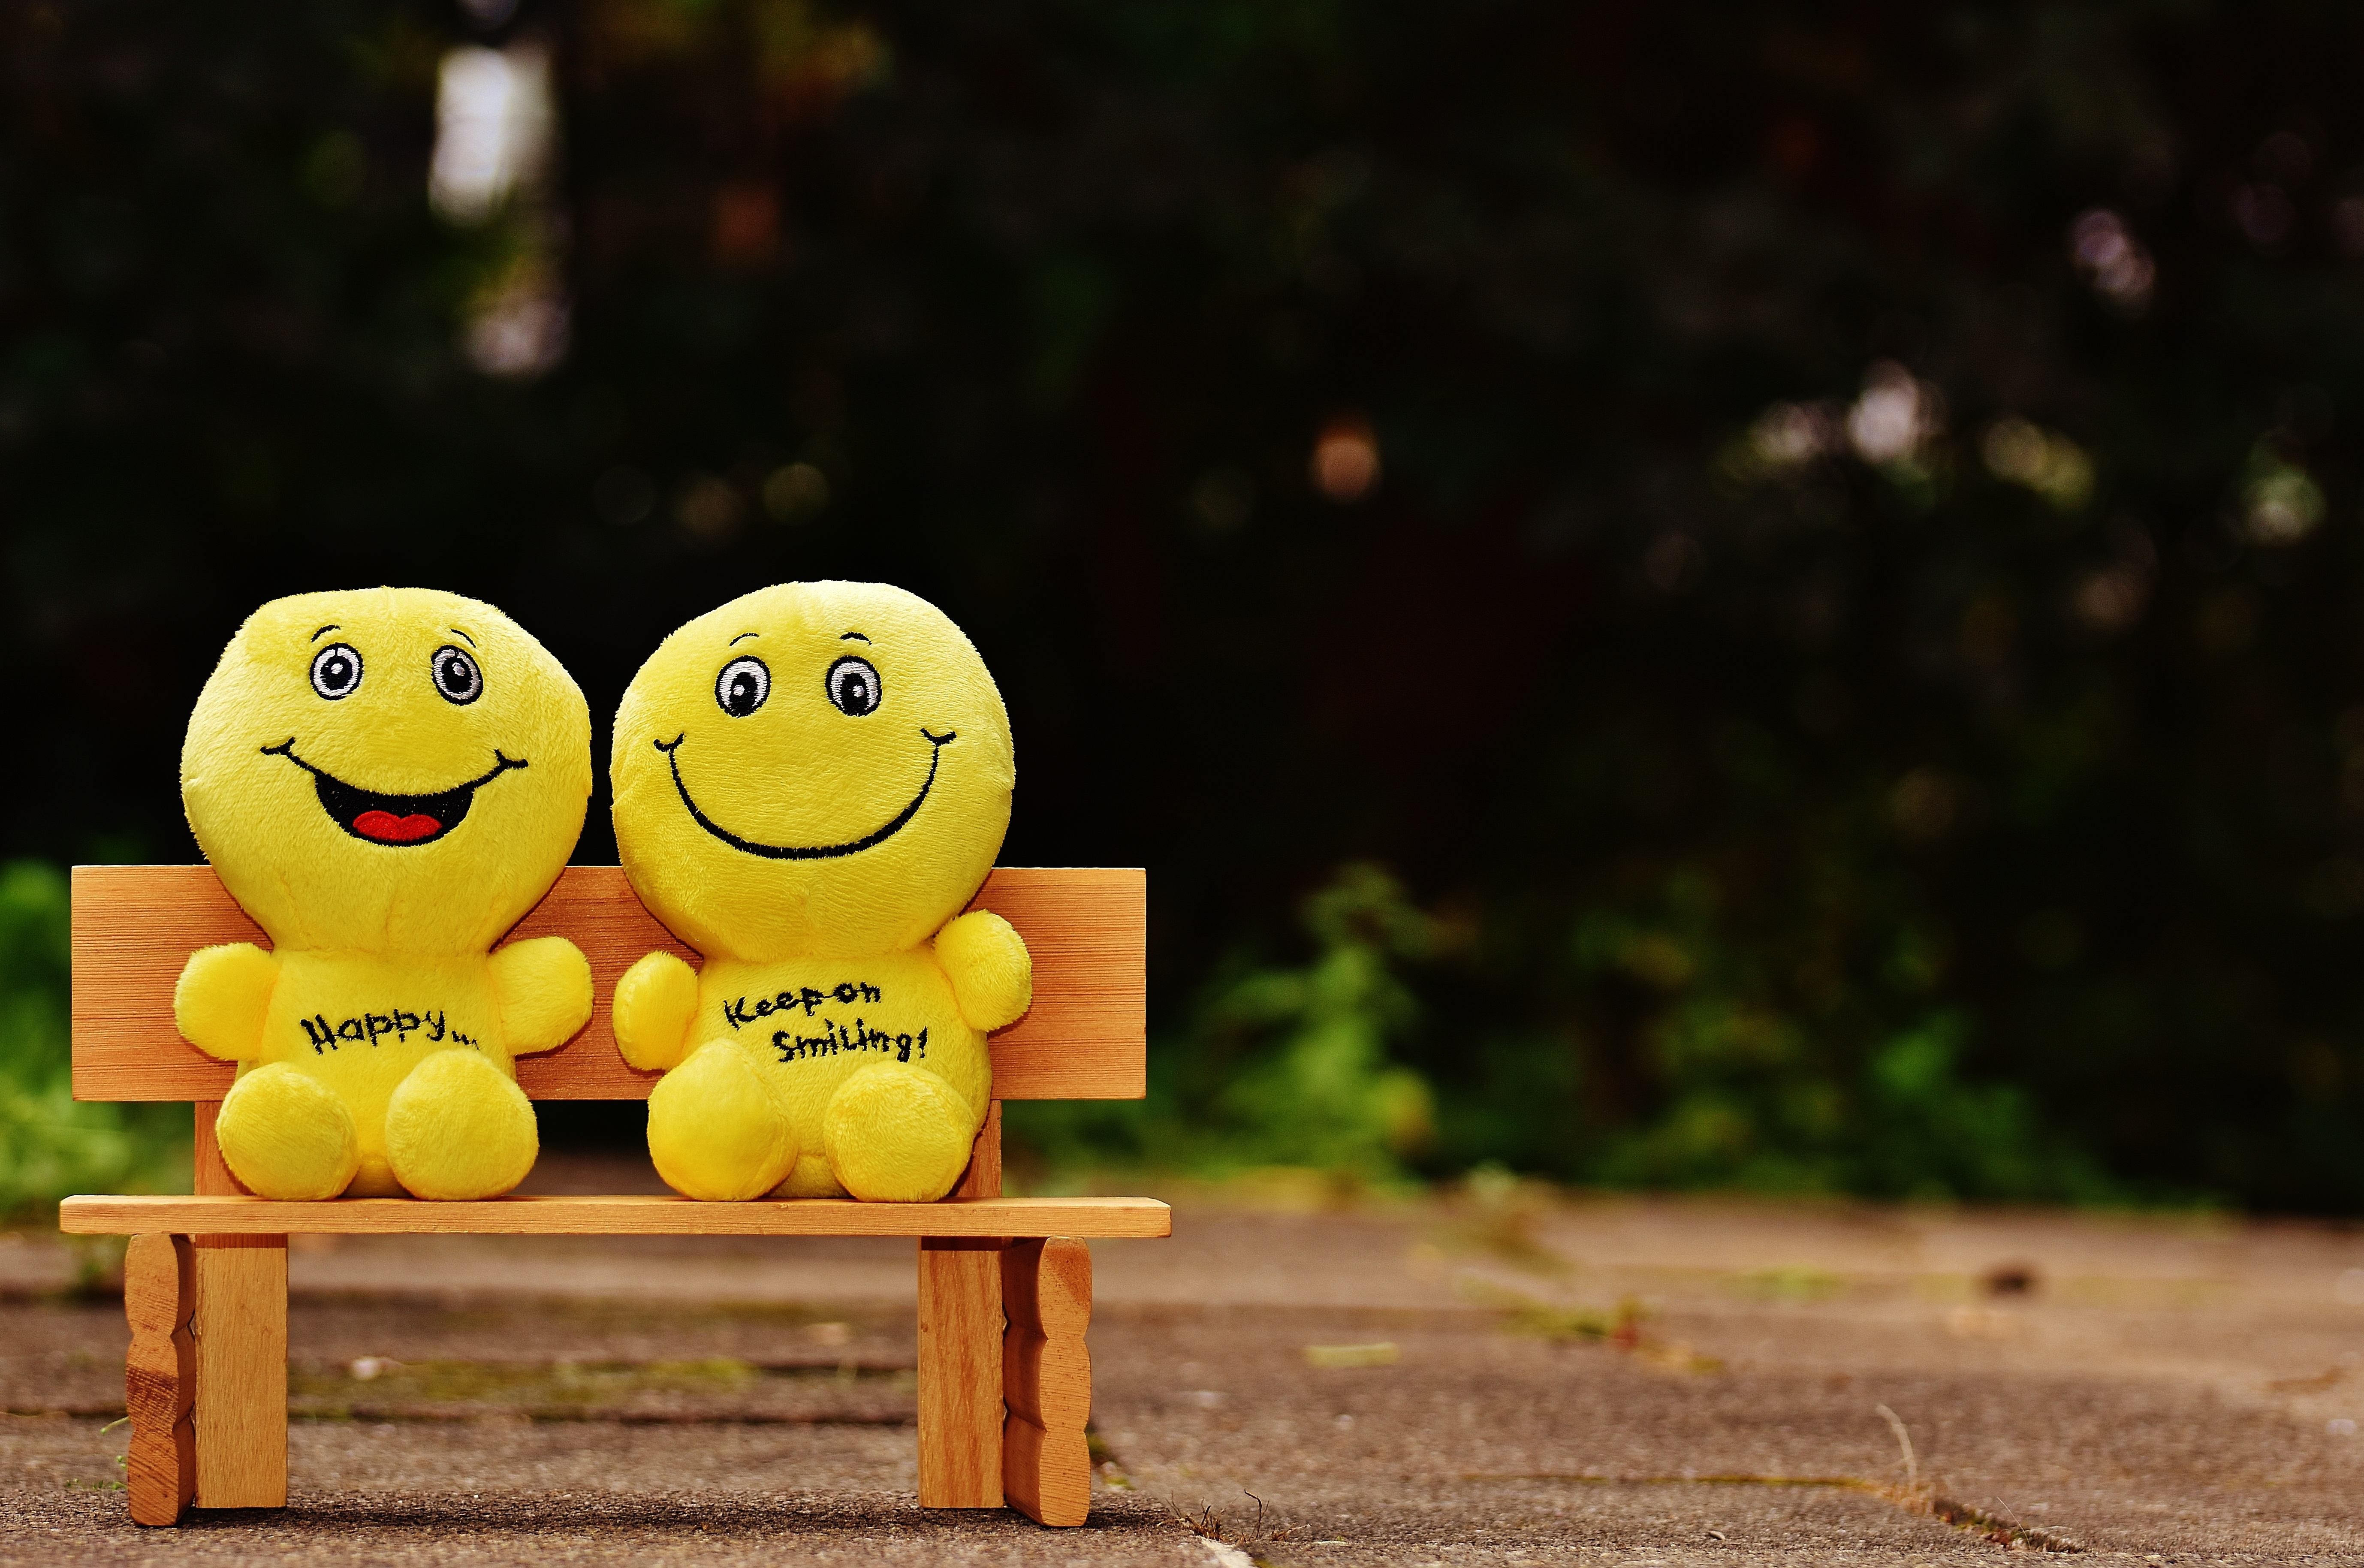 wallpapers miscellanea, cute, smile, emoticons, happy, smileys, bench, miscellaneous, cheery